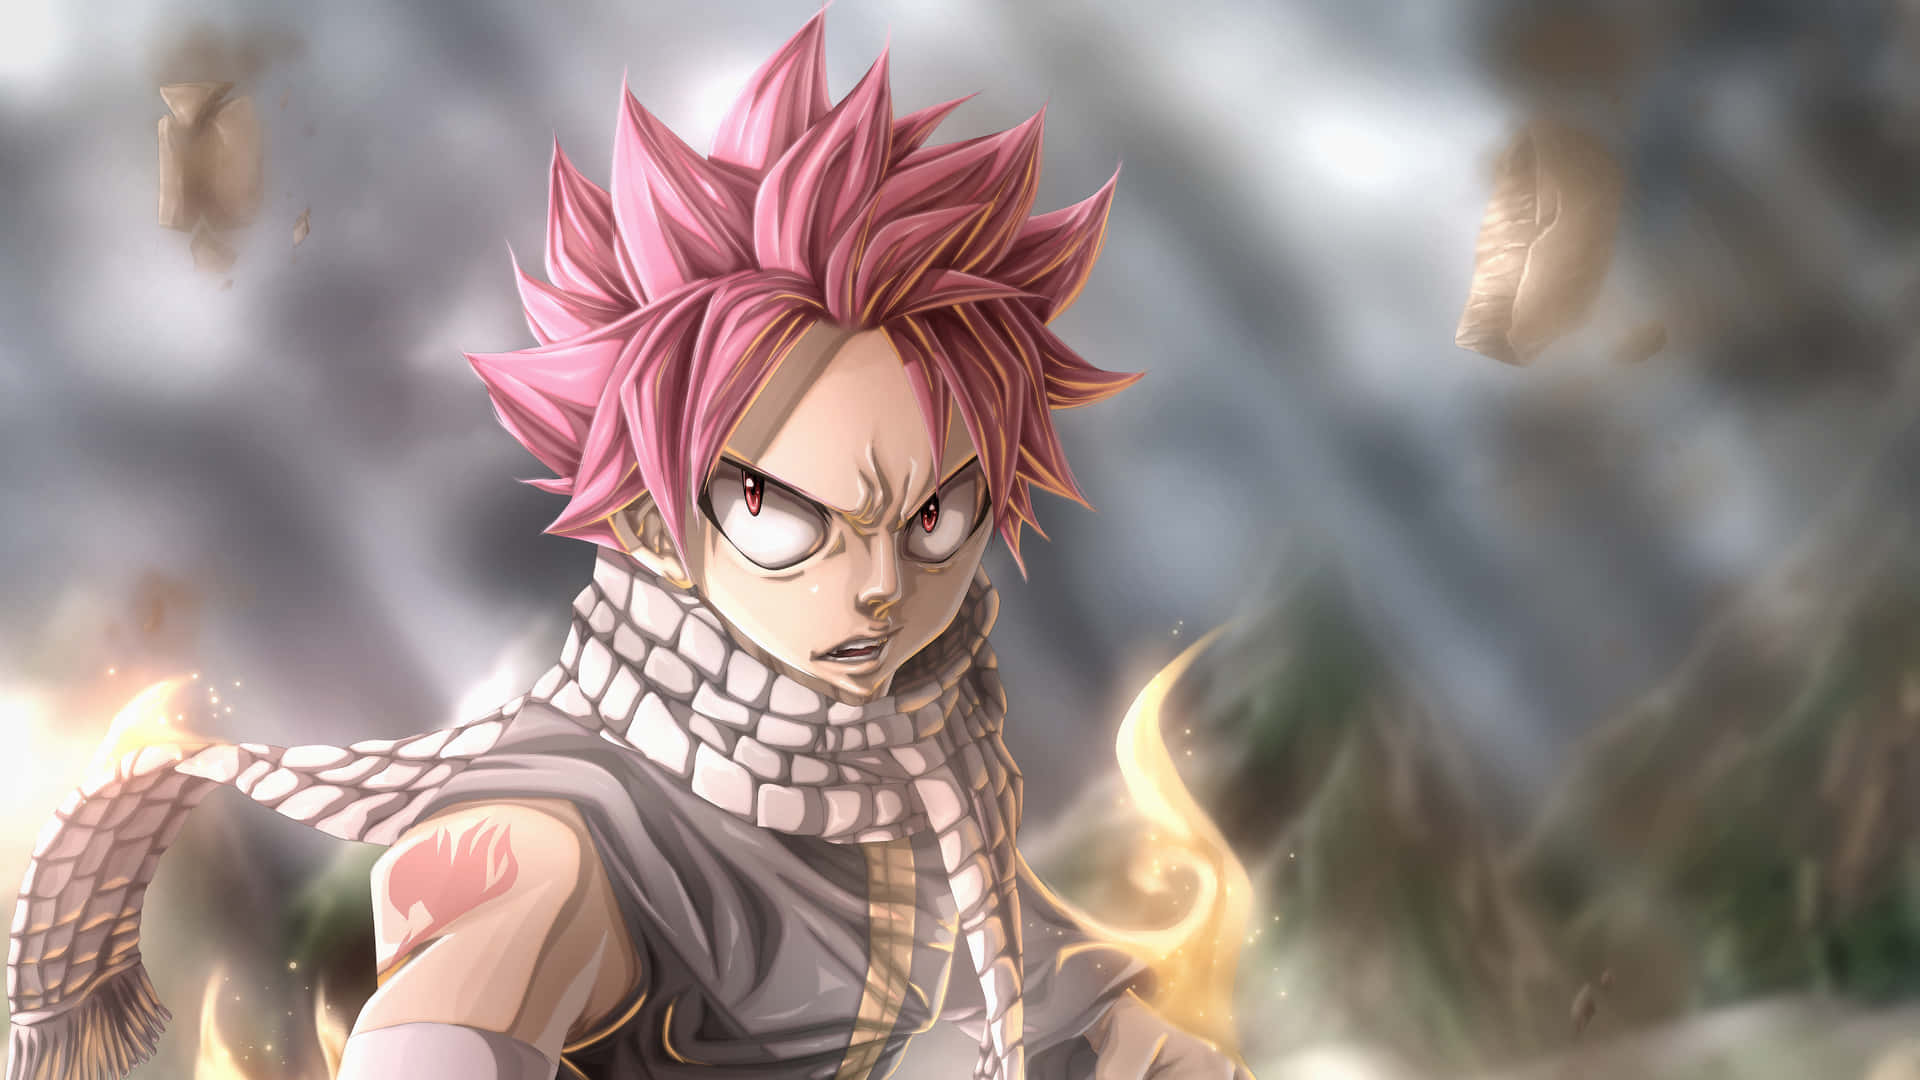 The magical adventures of Fairy Tail